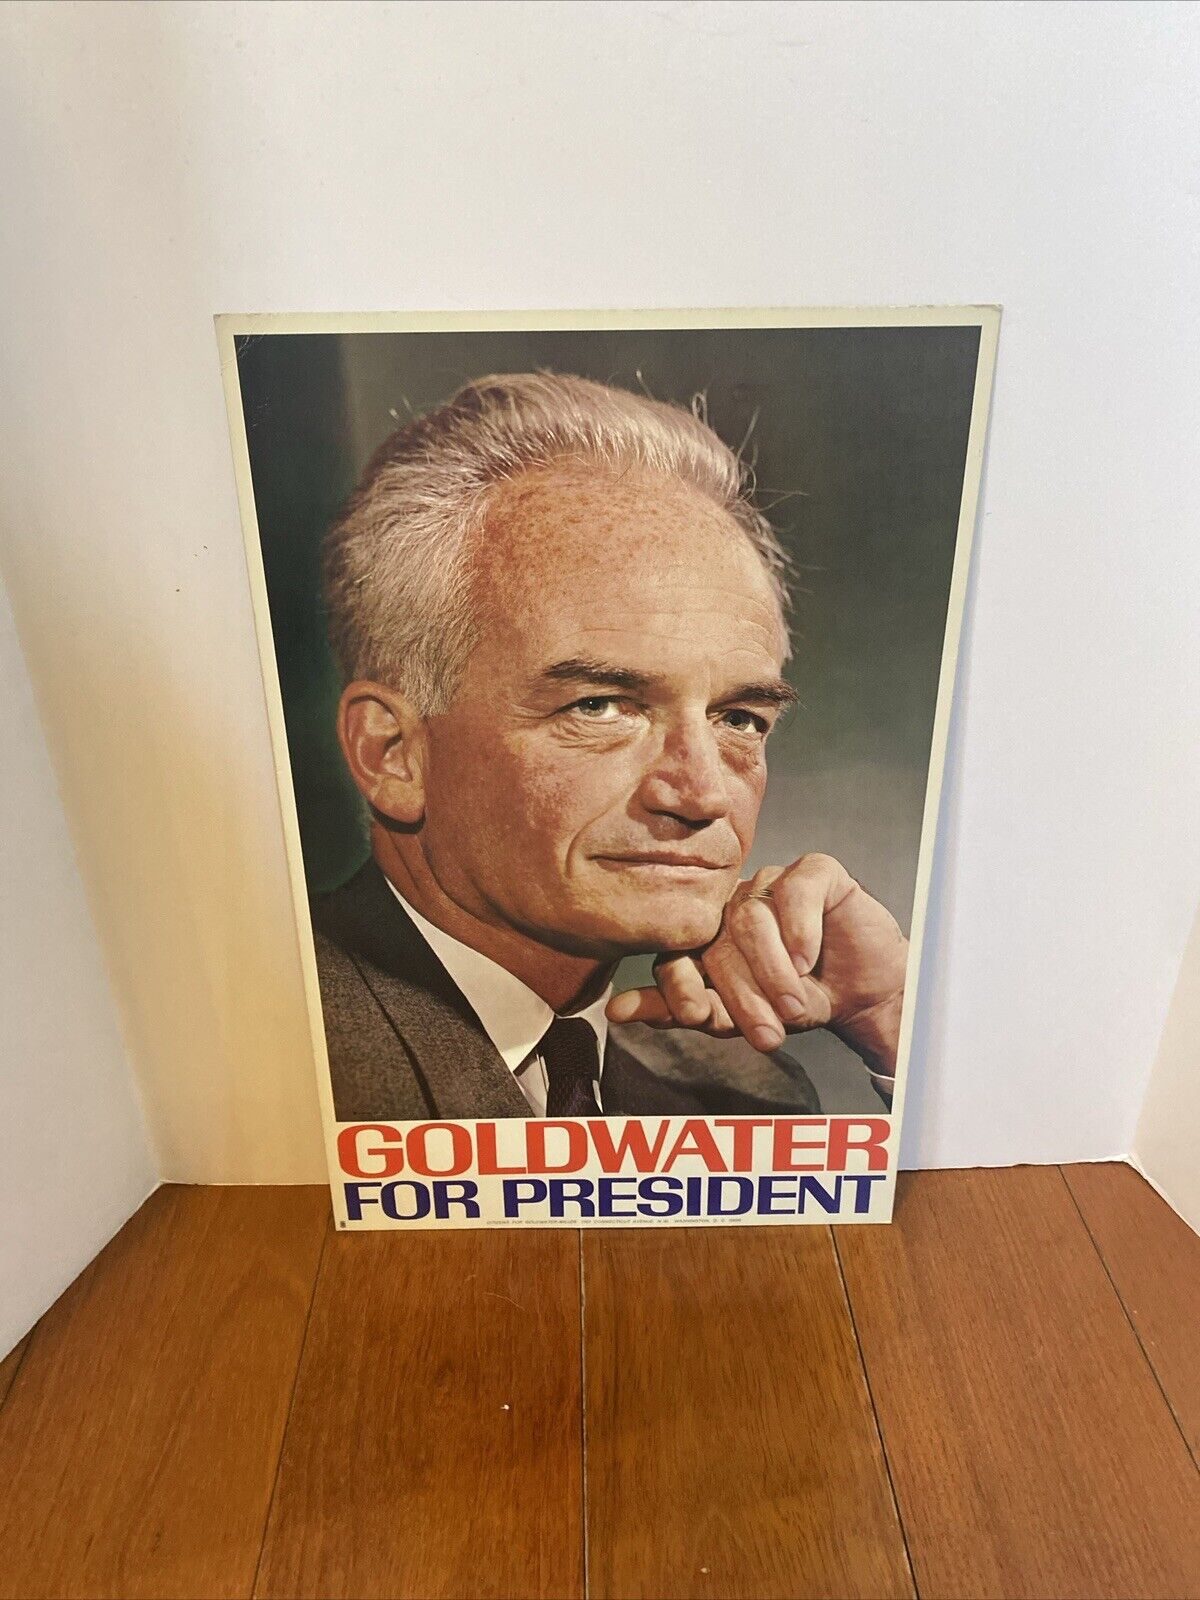 VTG 1964 Barry Goldwater For President Political Campaign Poster 17x11”